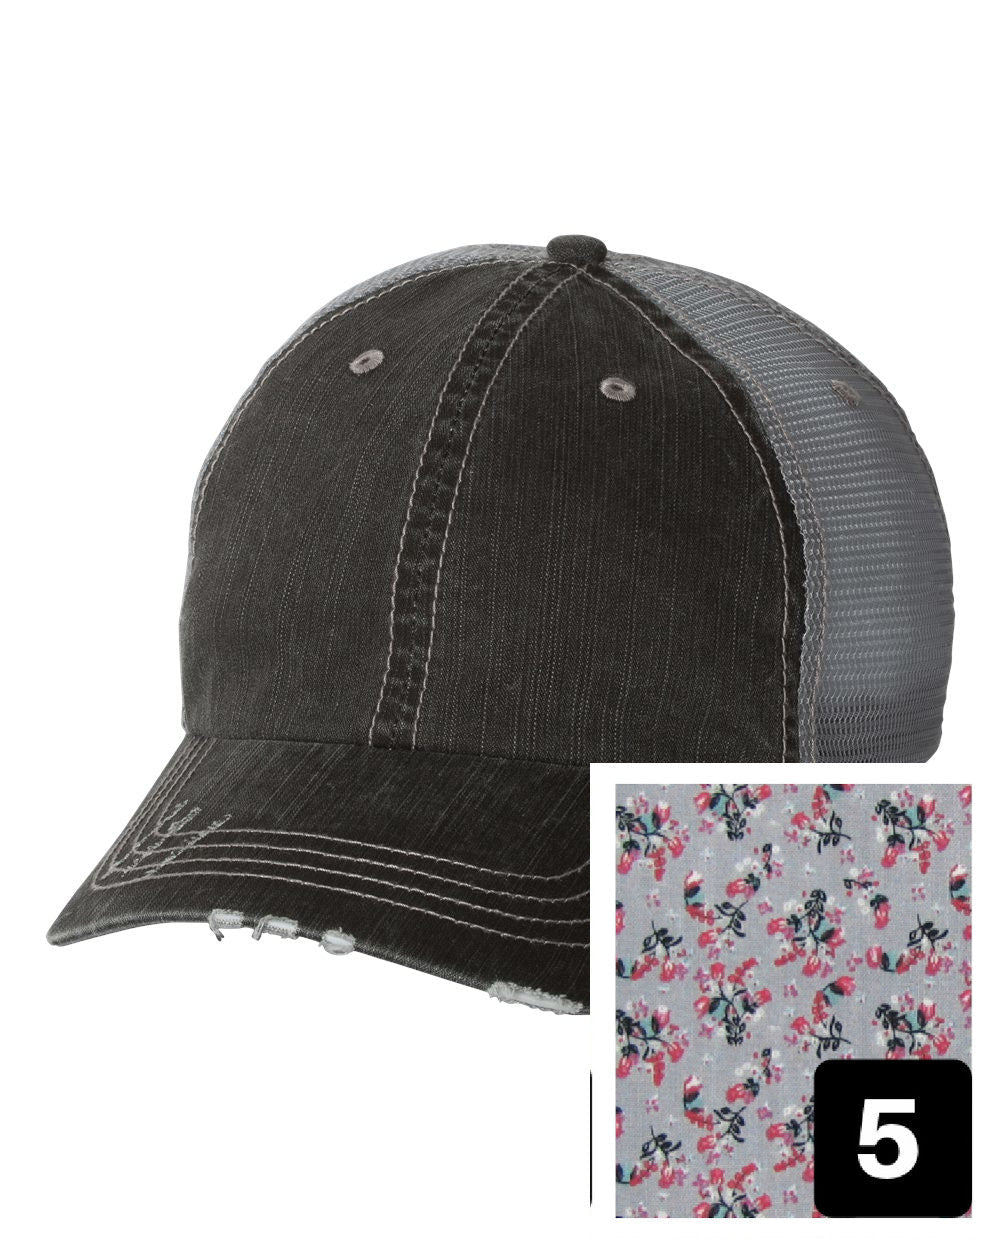 gray distressed trucker hat with purple and pink floral fabric state of Hawaii